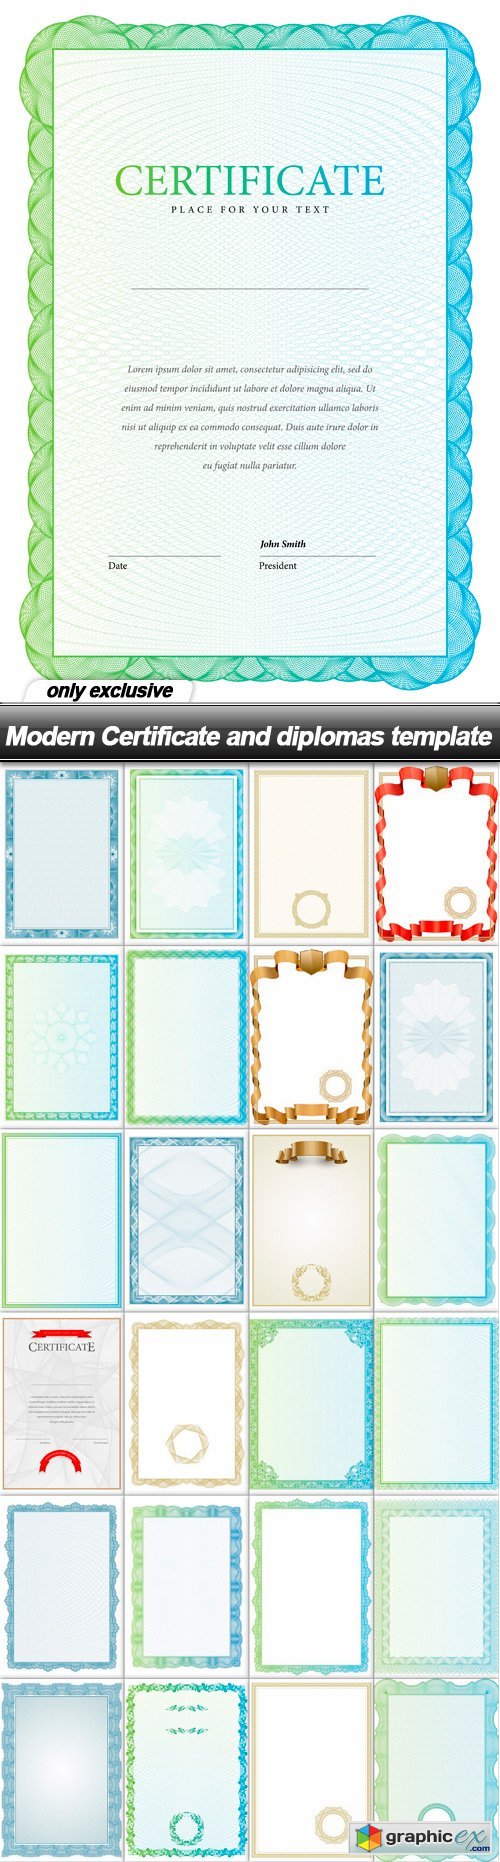 Modern Certificate and diplomas template - 25 EPS